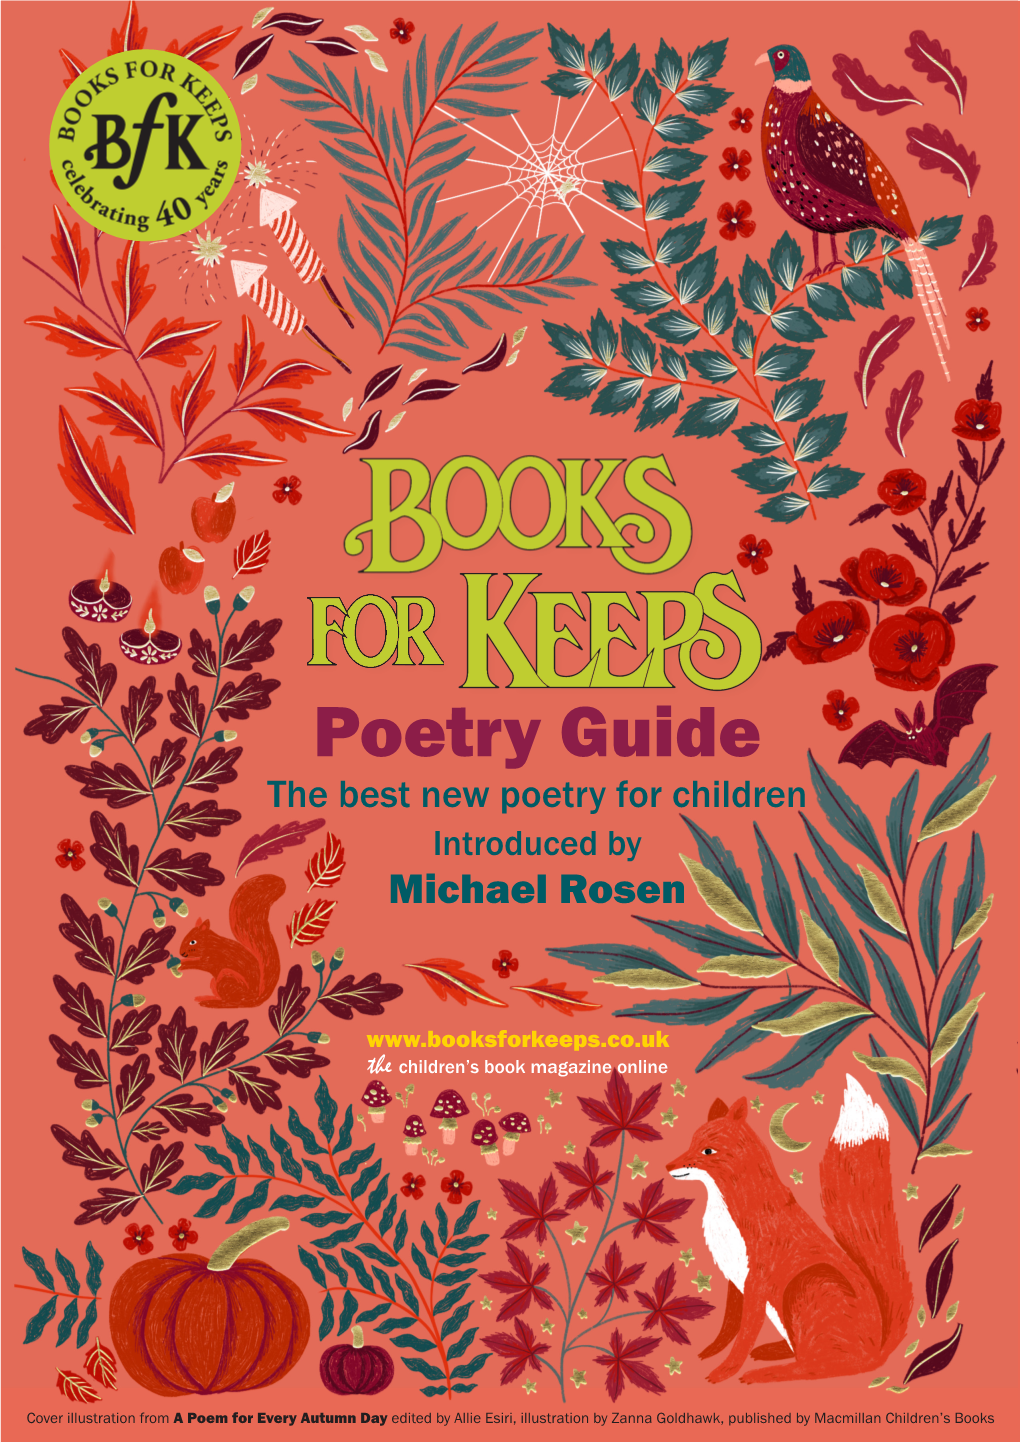 Poetry Guide the Best New Poetry for Children Introduced by Michael Rosen